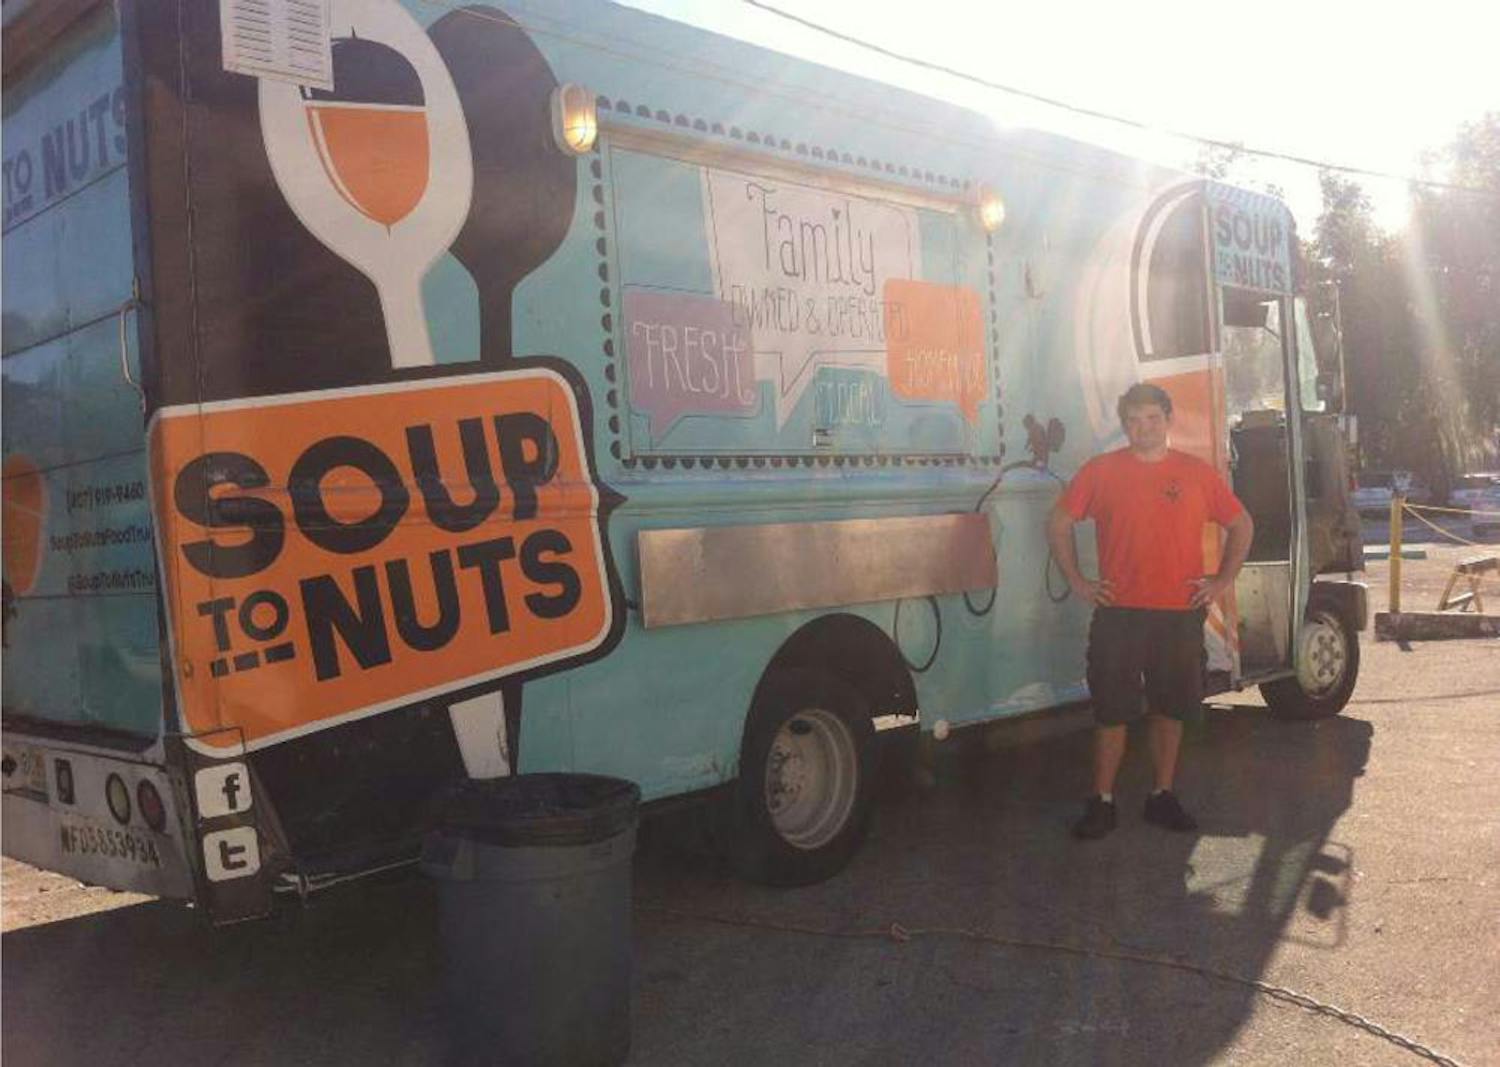 Peter Sturgeon, 26, stands outside his food truck, Soup to Nuts, as he prepares for an event at First Magnitude Brewery.&nbsp;